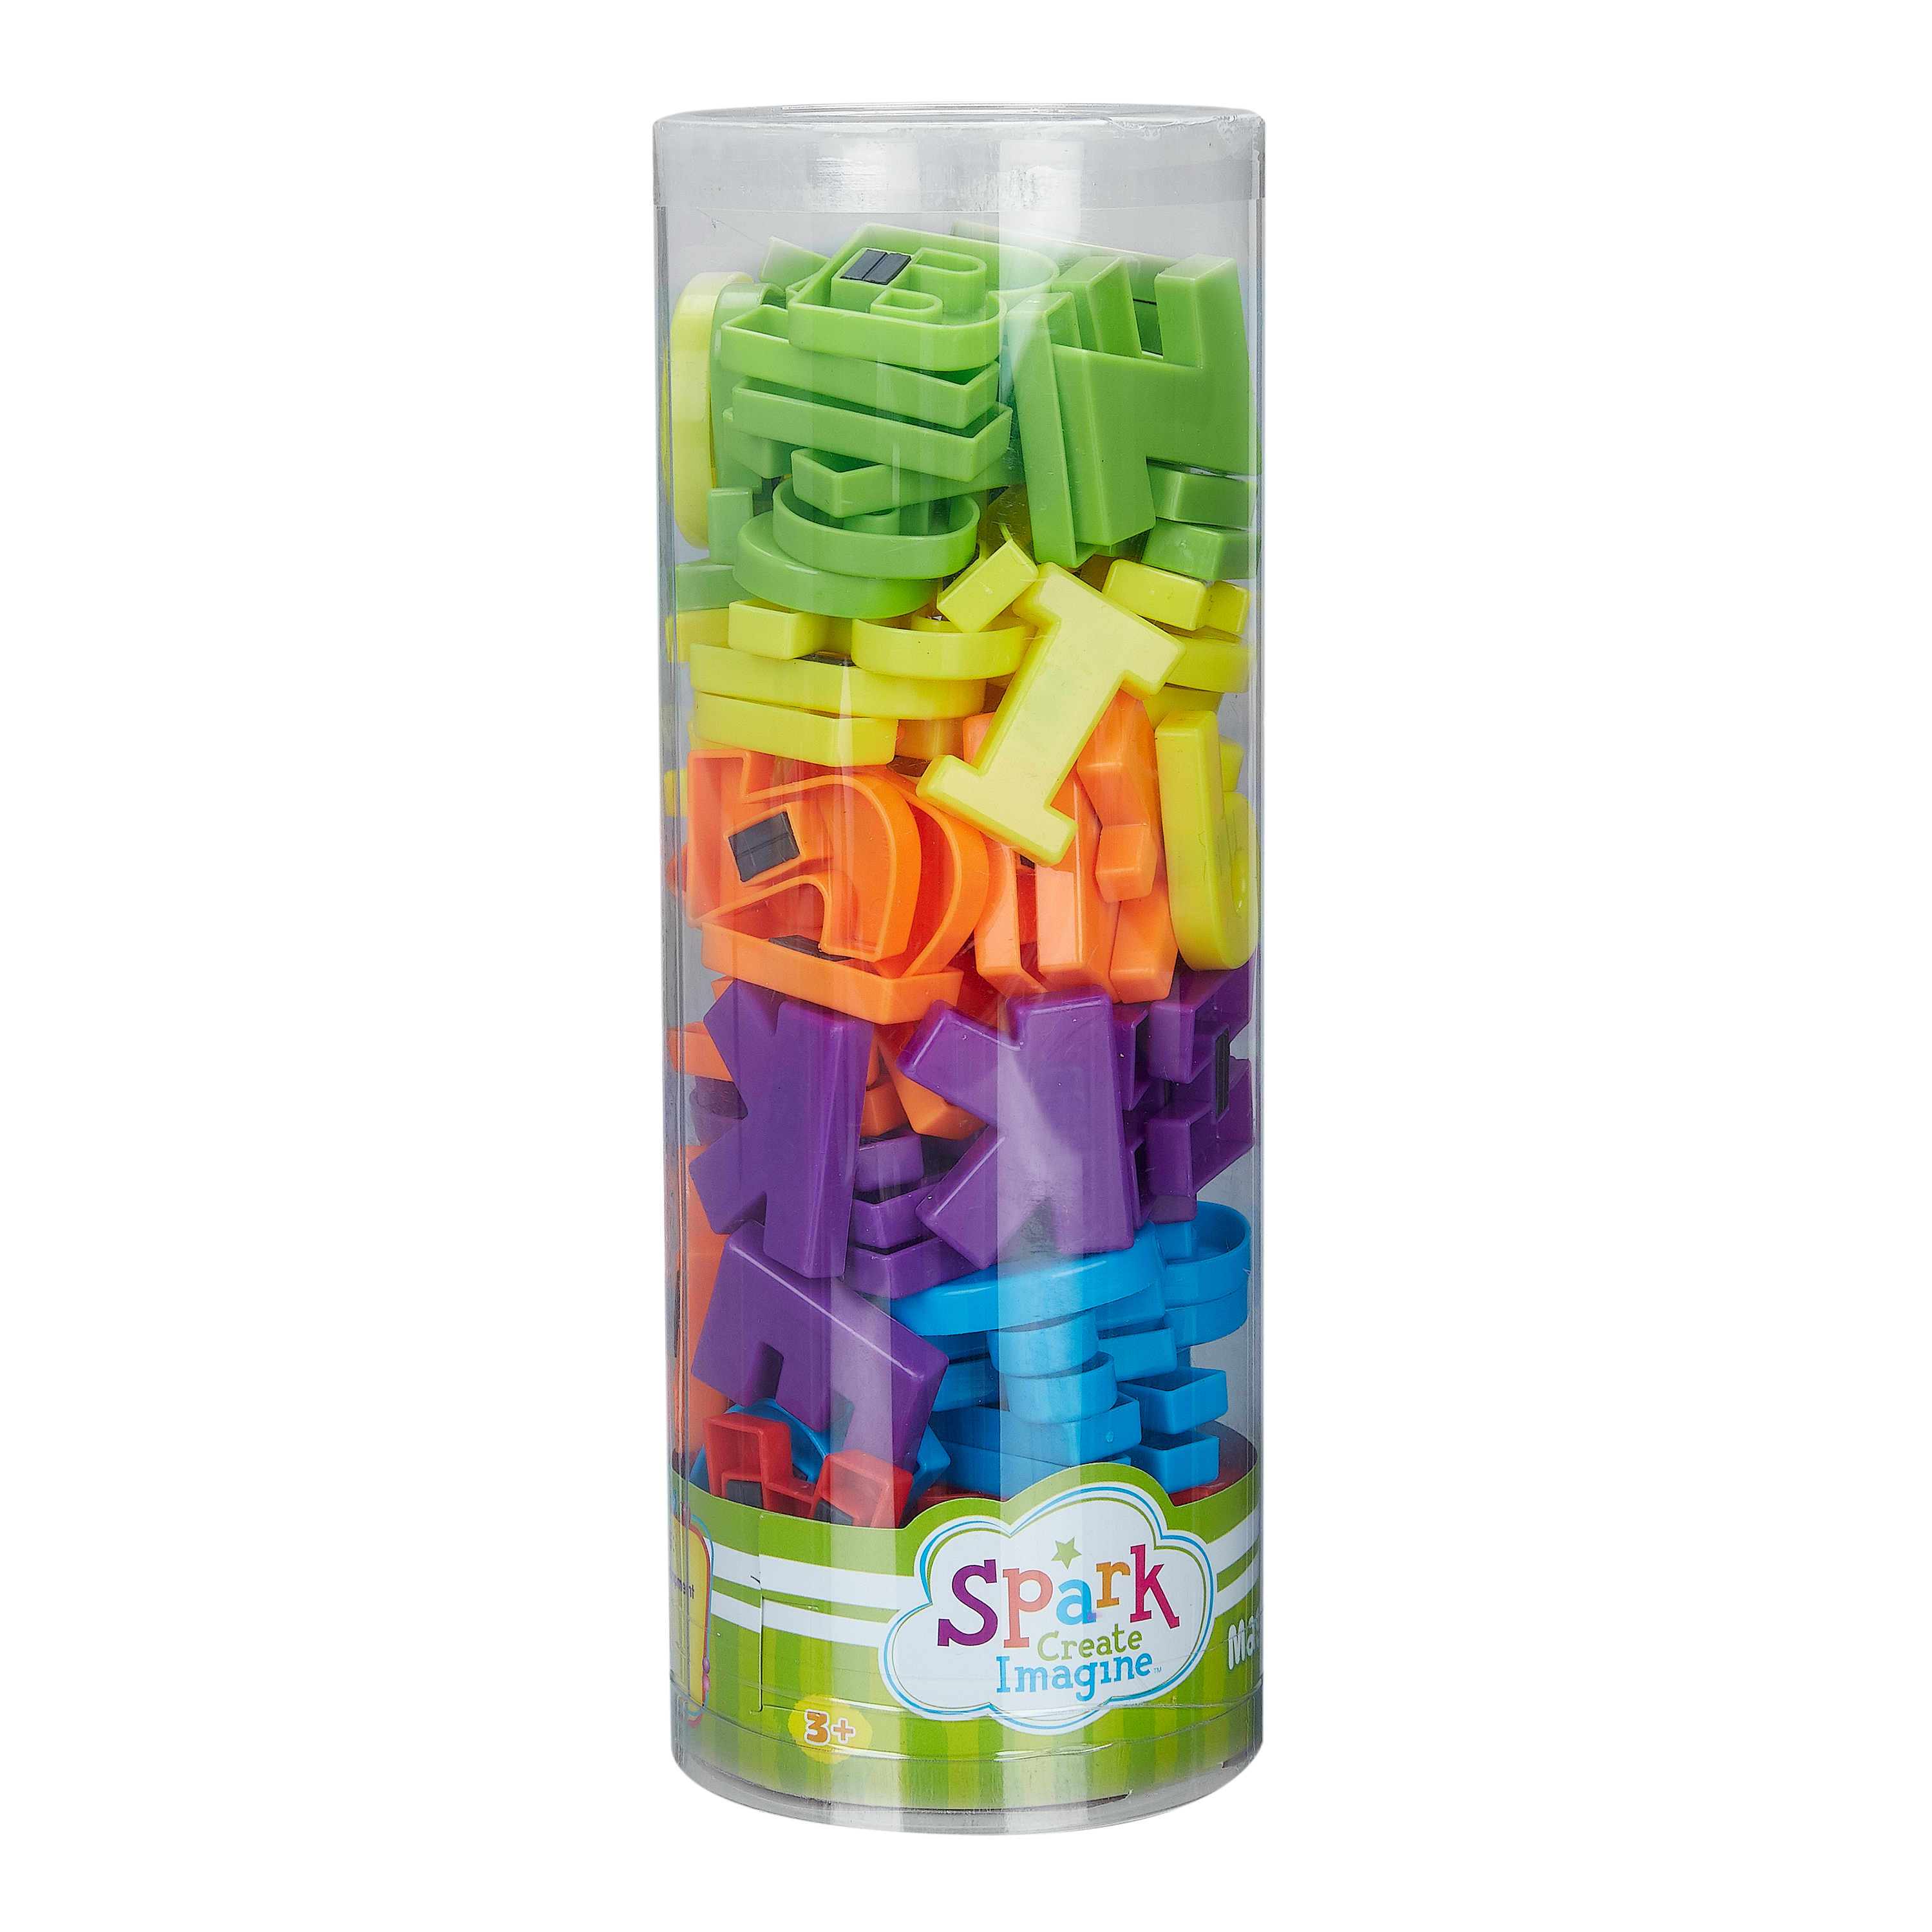 Spark. Create. Imagine. Magnetic Letters & Numbers, 120 Pieces - image 3 of 4